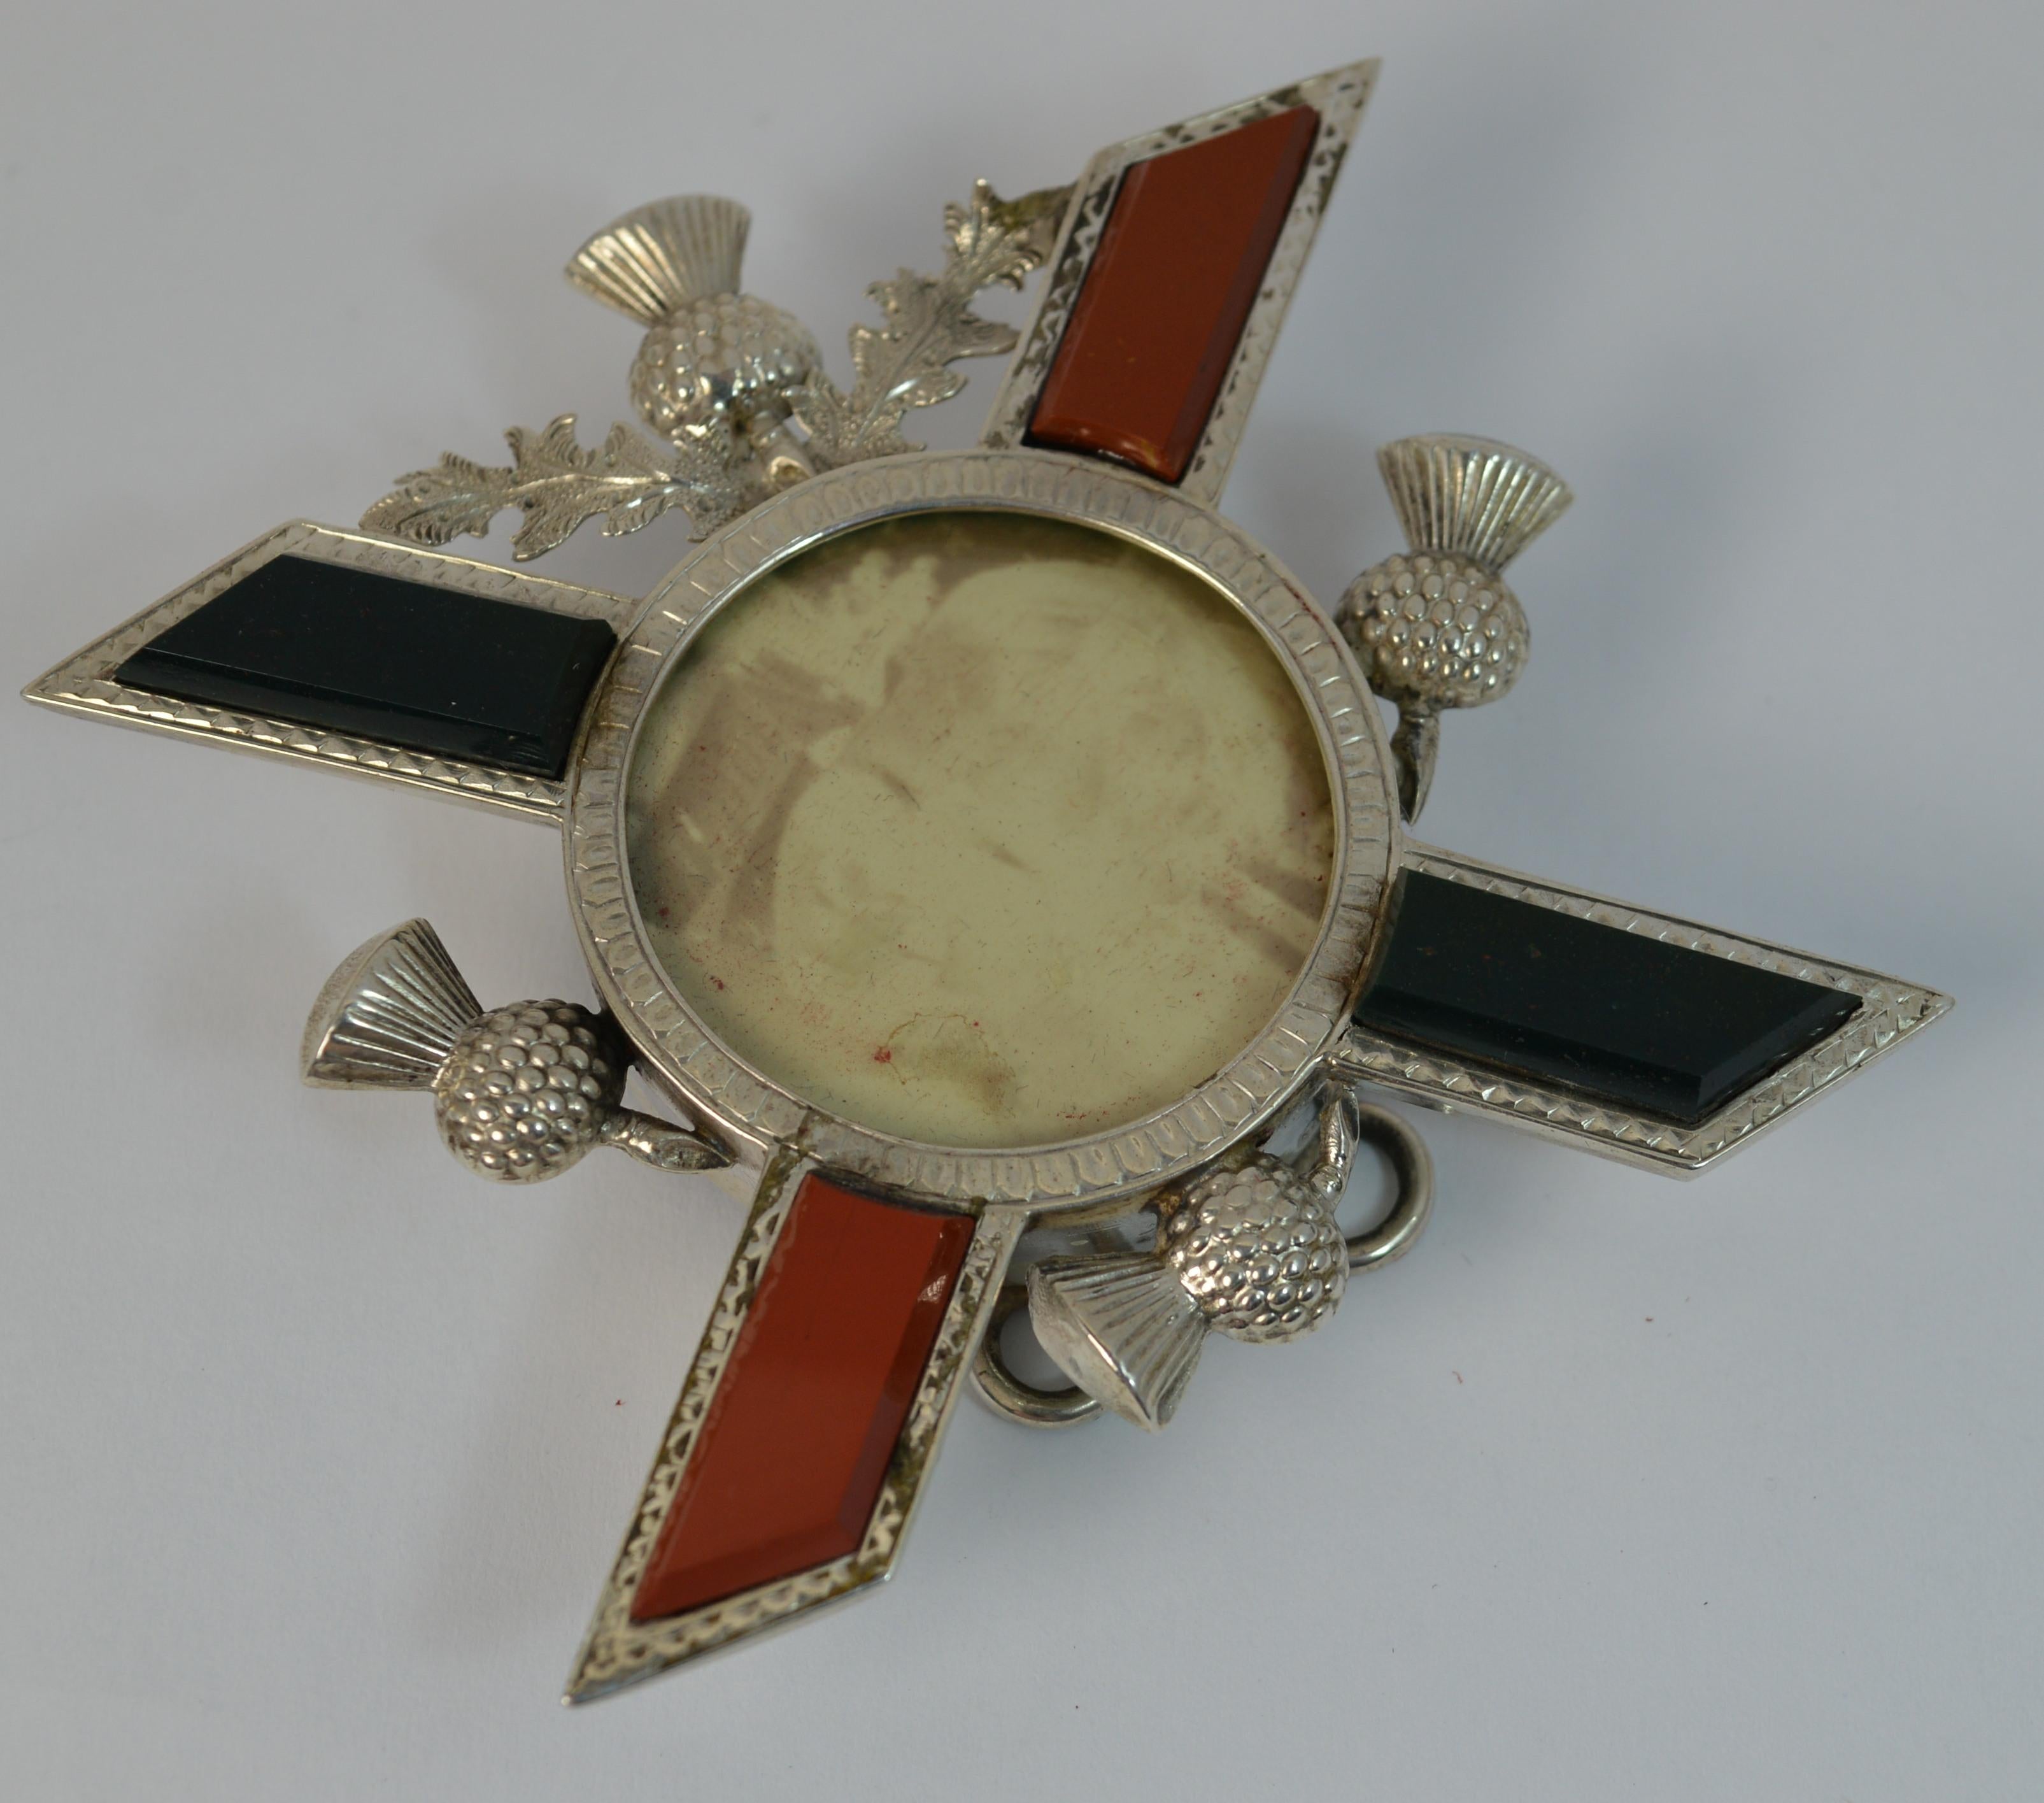 Victorian Rare Edwardian Scottish Thistle Solid Silver Bloodstone and Carnelian Photoframe